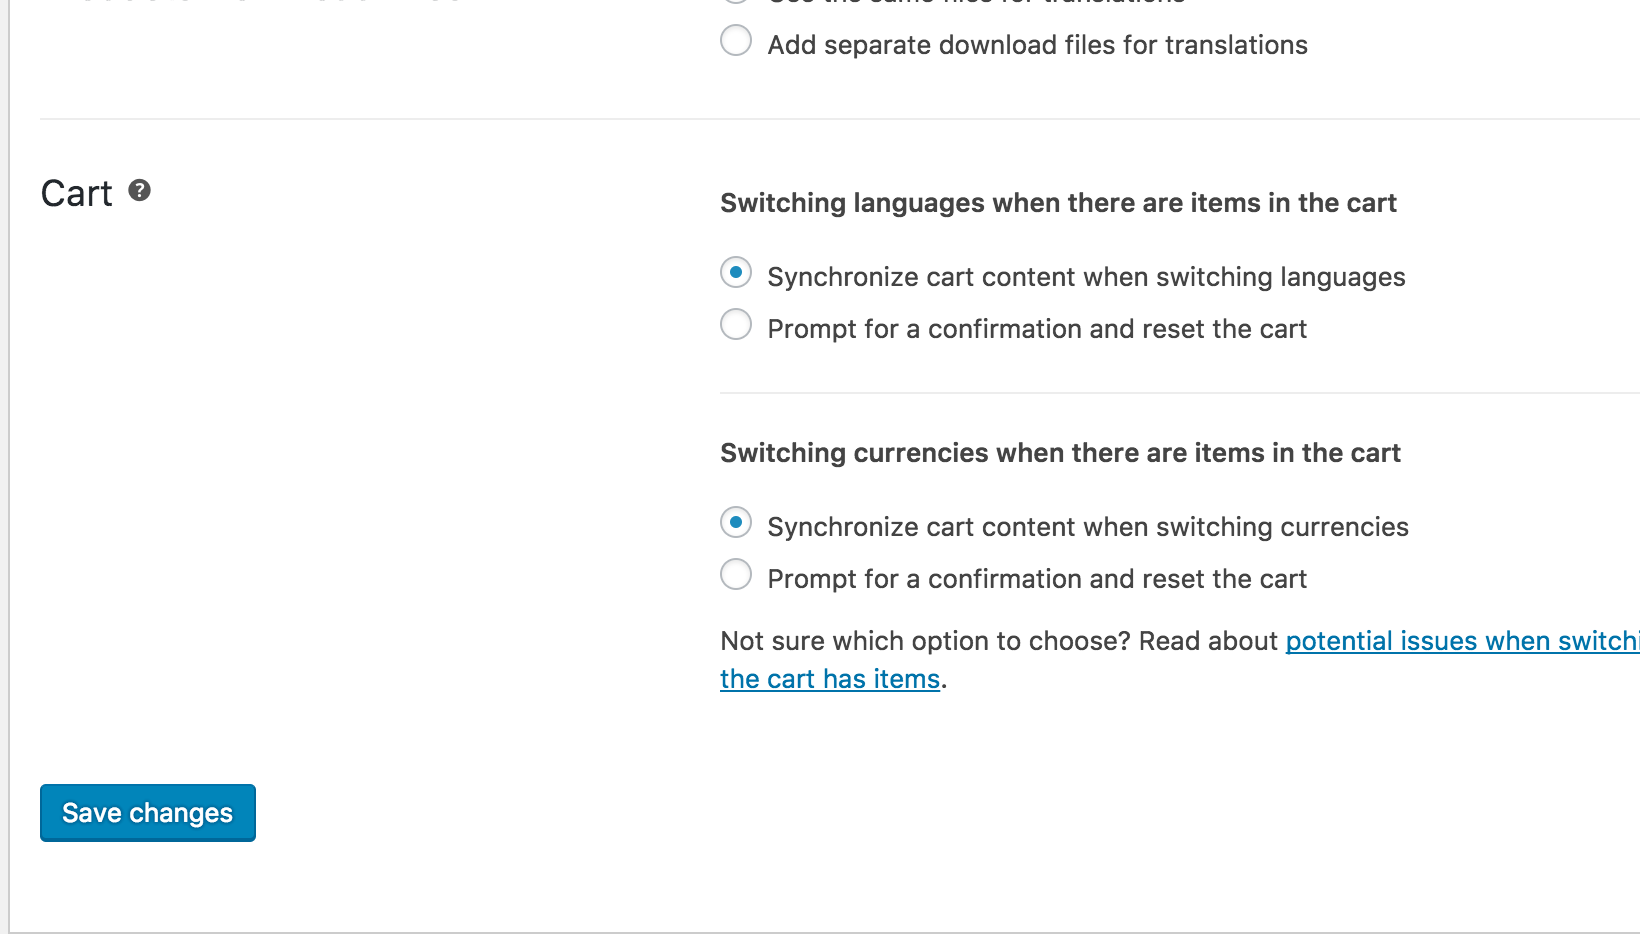 The new options to reset the cart when switching languages or currencies in WooCommerce Multilingual 4.0